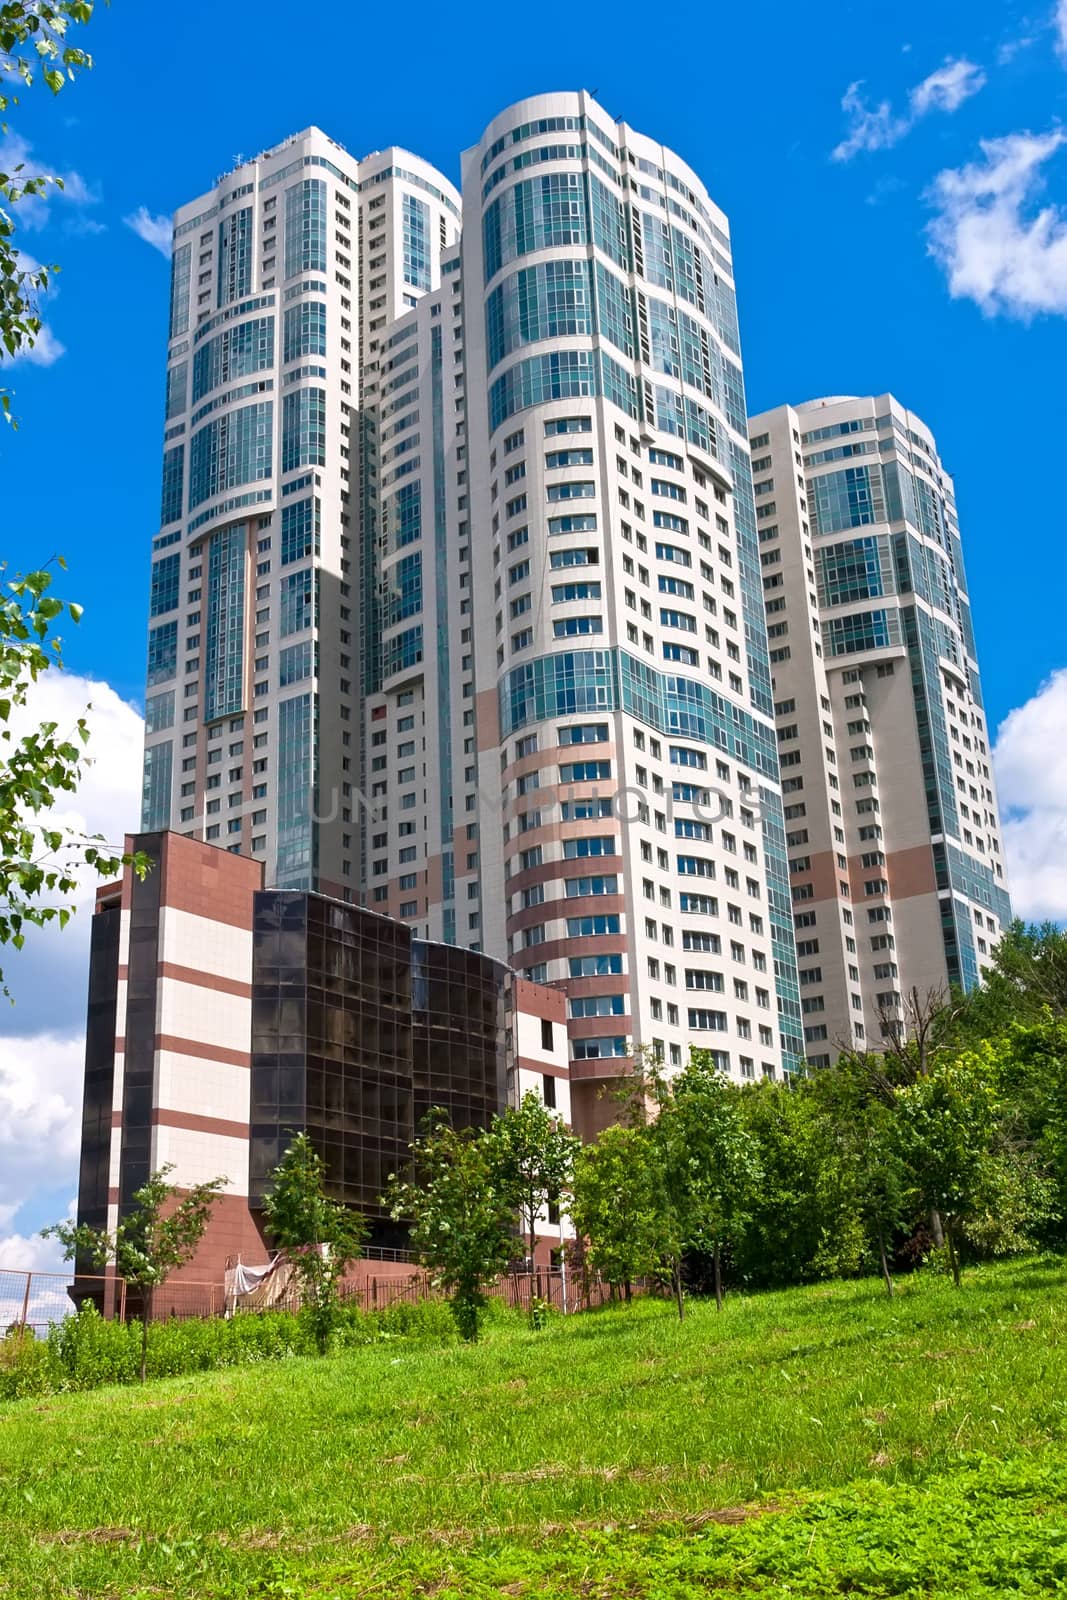 Beautiful view of modern apartment buildings under blue sky